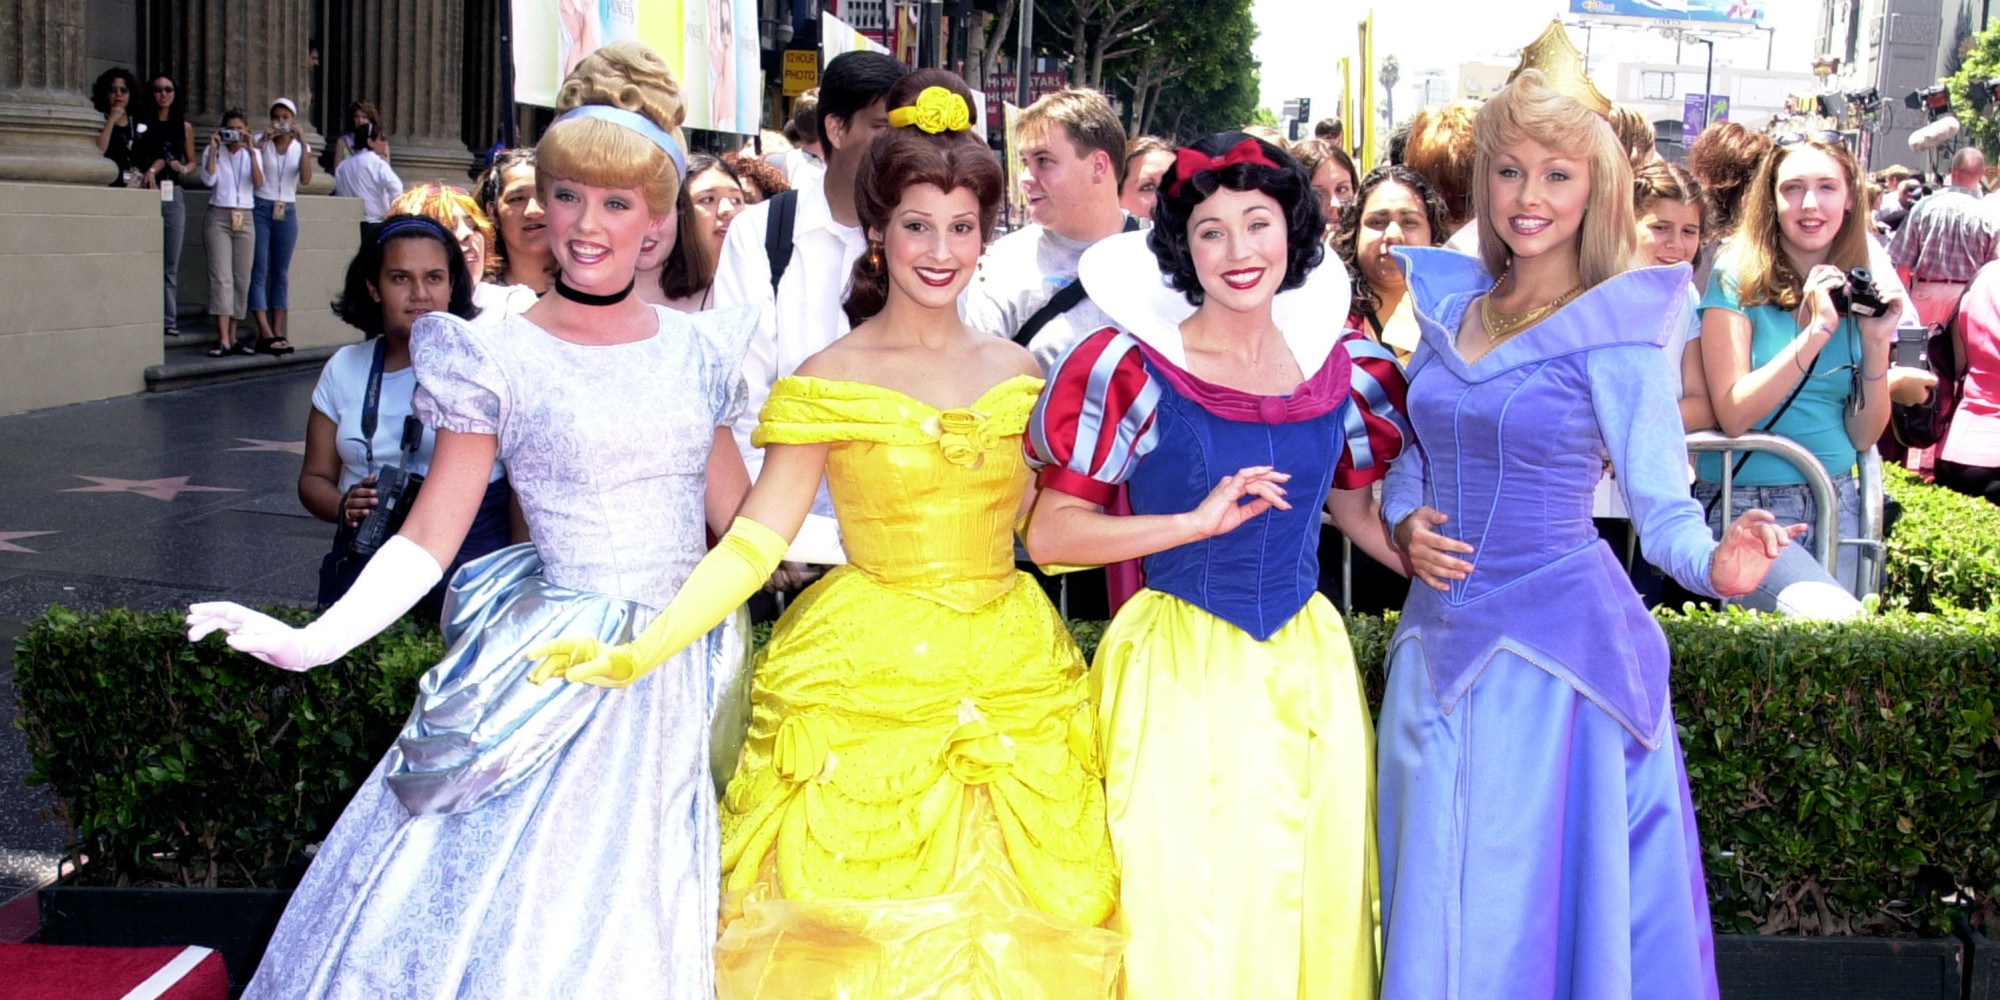 Would You Really Want Your Life to Be Like the Disney Princesses